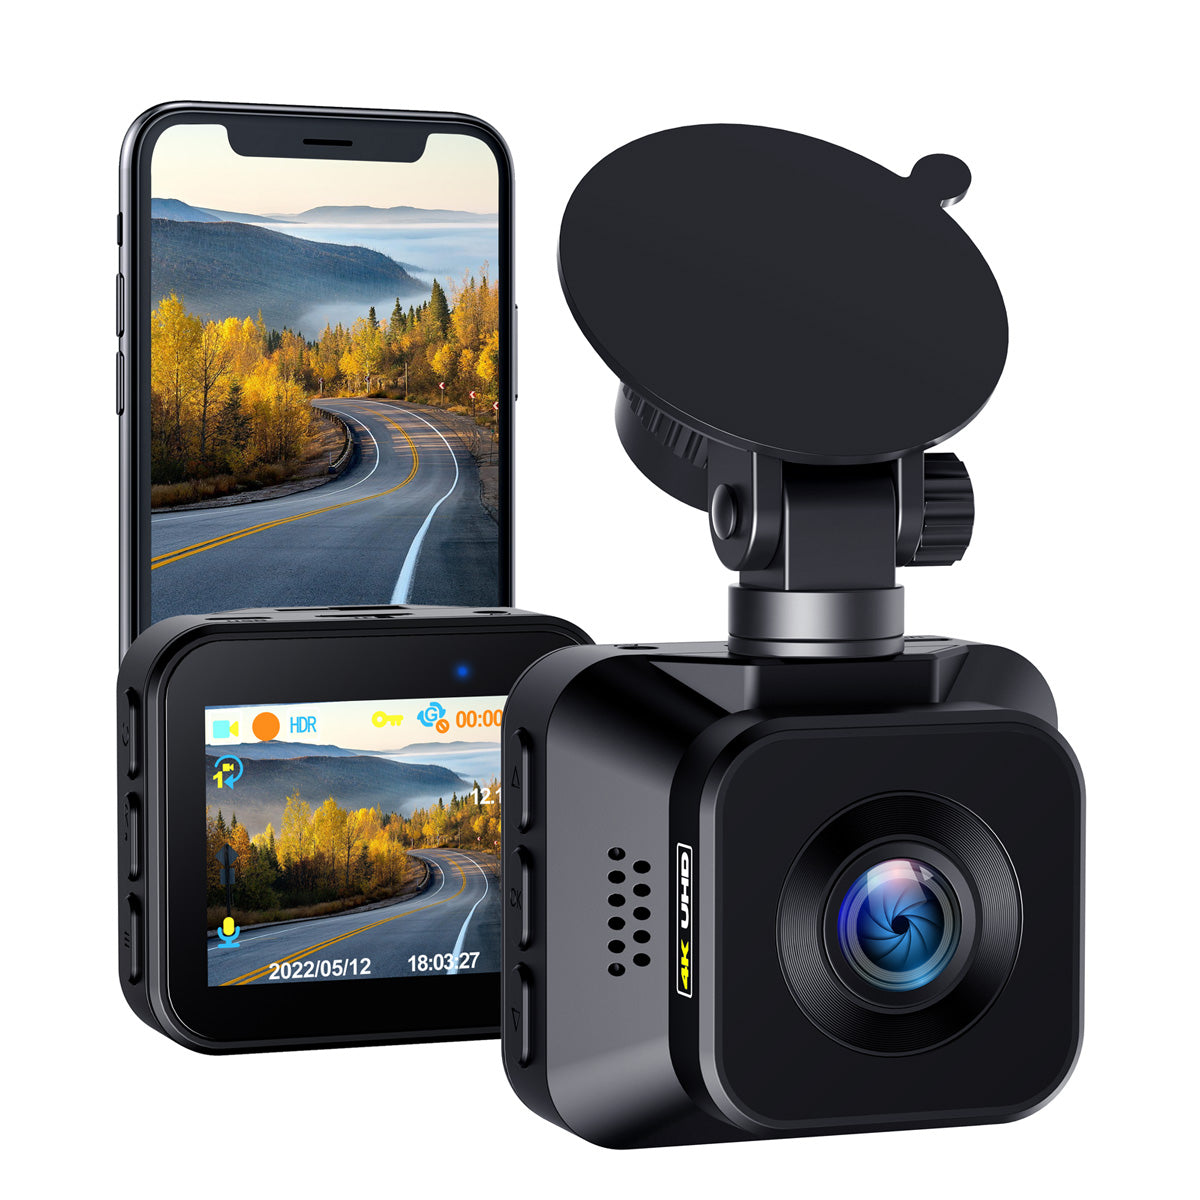 CAMPARK 4K Dash Cam 3 Channel 1440P+1080P+1080P Car Camera Driving Recorder  with IR Night Vision, Capacitor, Parking Mode, G-Sensor, Support 256GB